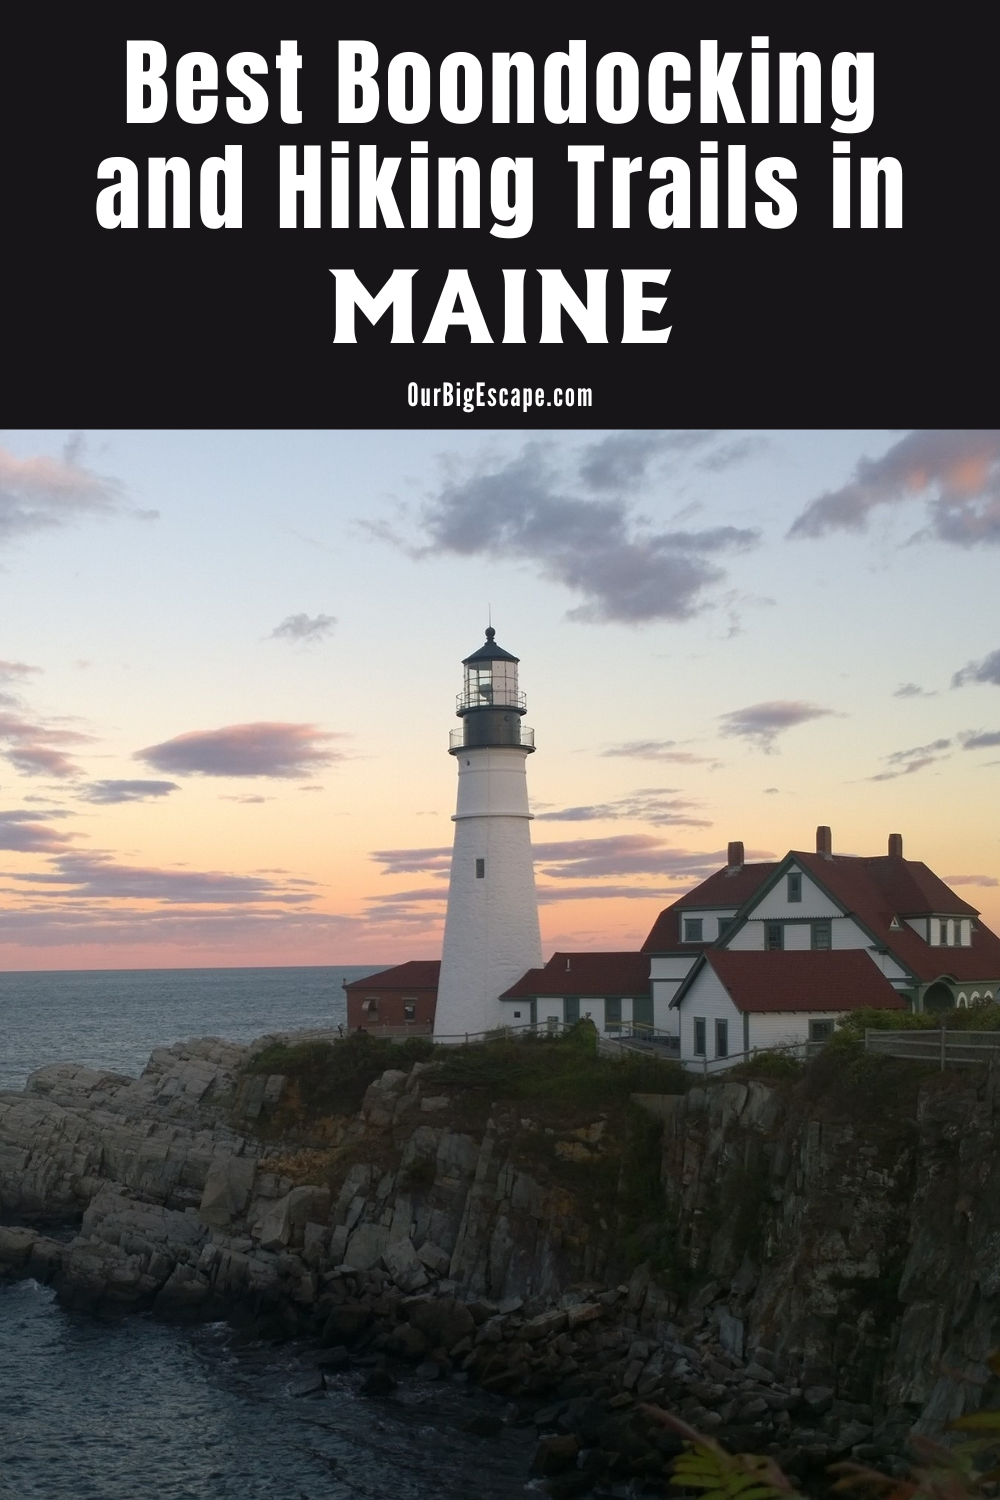 Best Boondocking and Hiking Trails in Maine